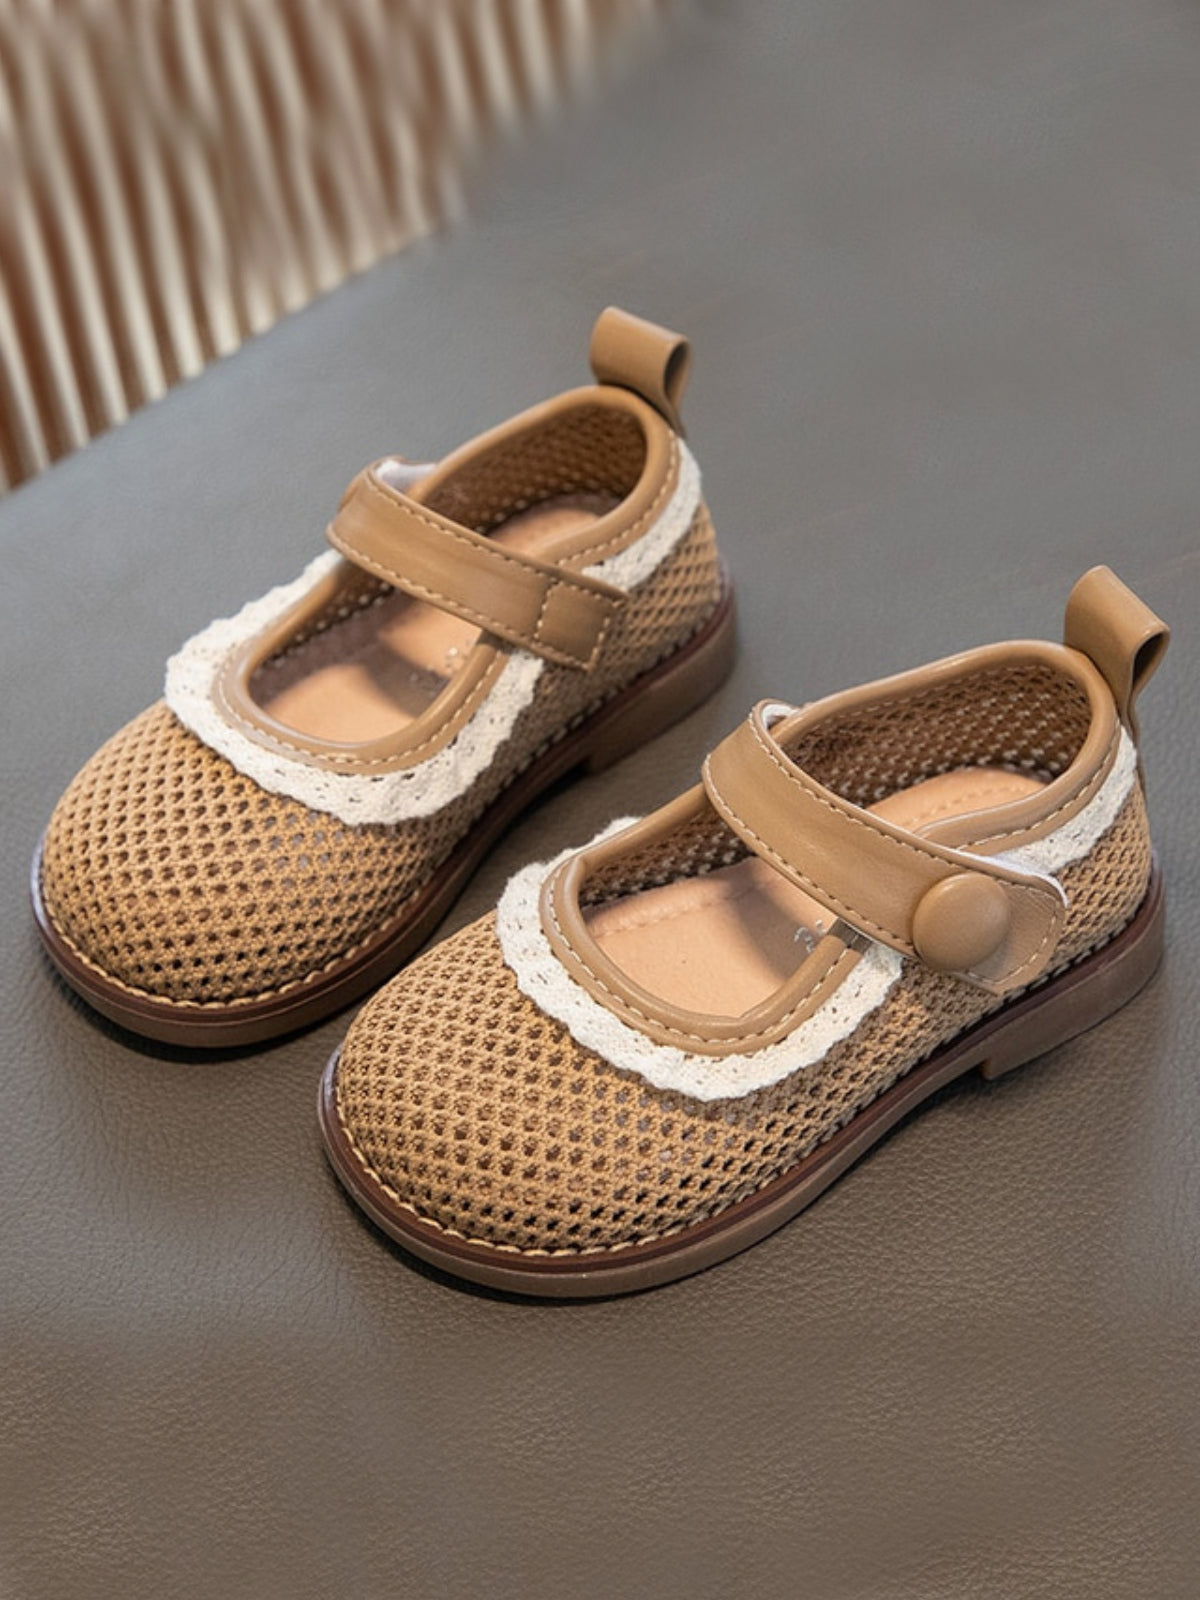 Mia Belle Girls Mesh Mary Jane Shoes | Shoes By Liv and Mia